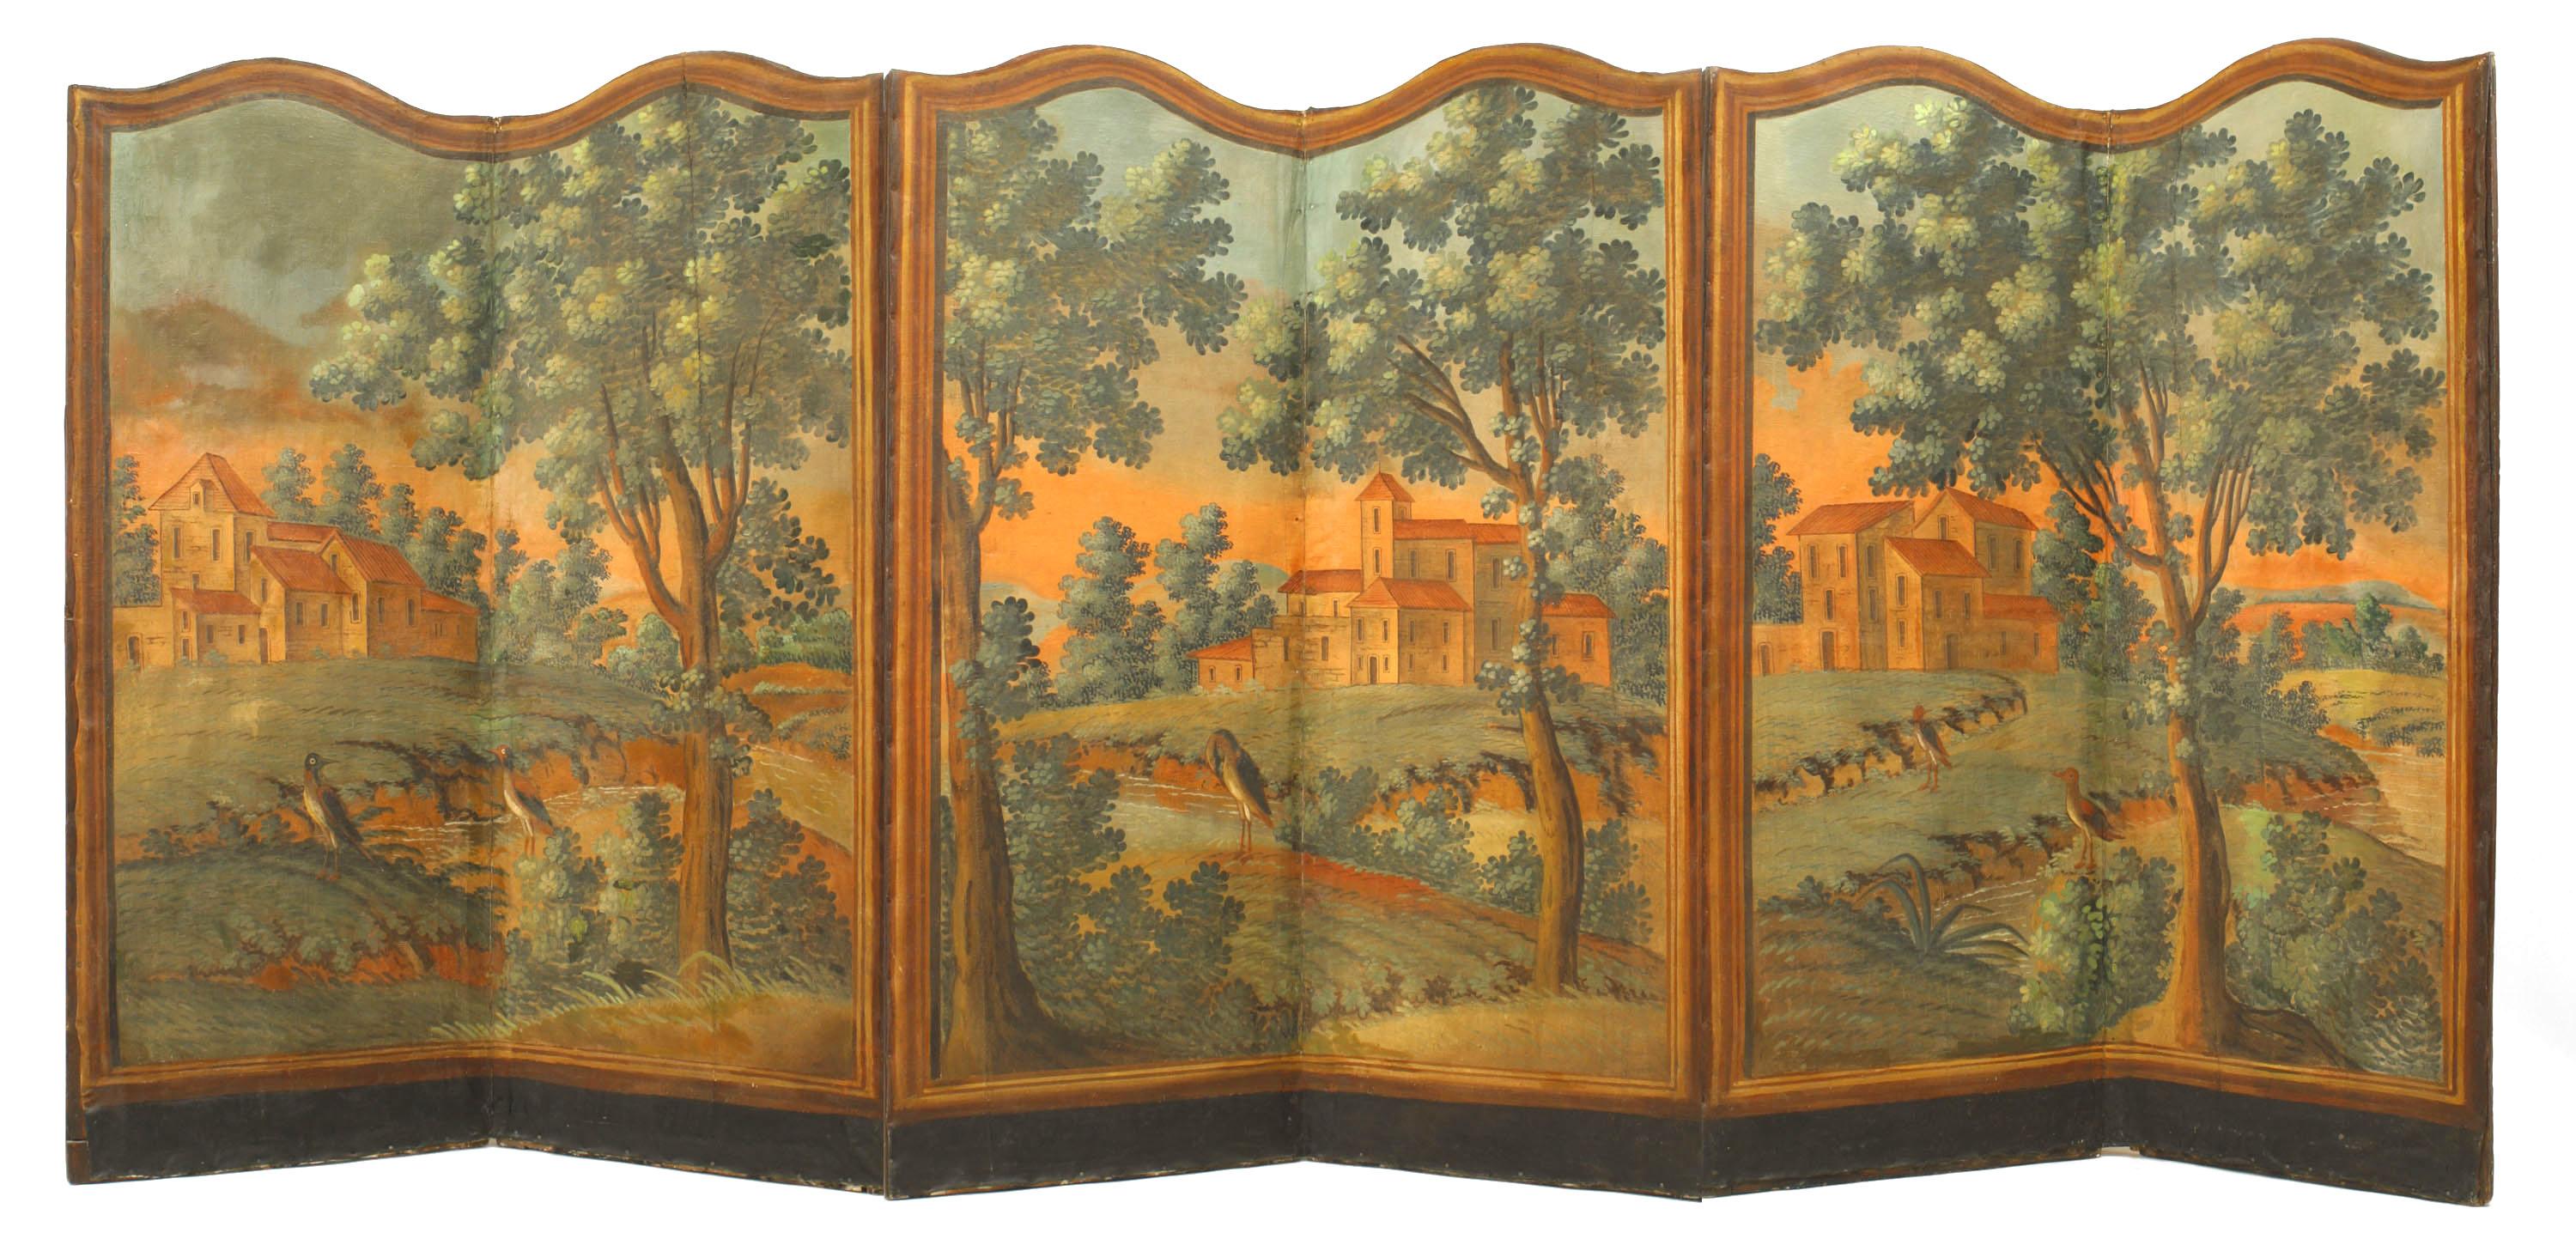 French Provincial (18th century) 6 fold screen with painted scenes of rustic countryside with farm house.
    